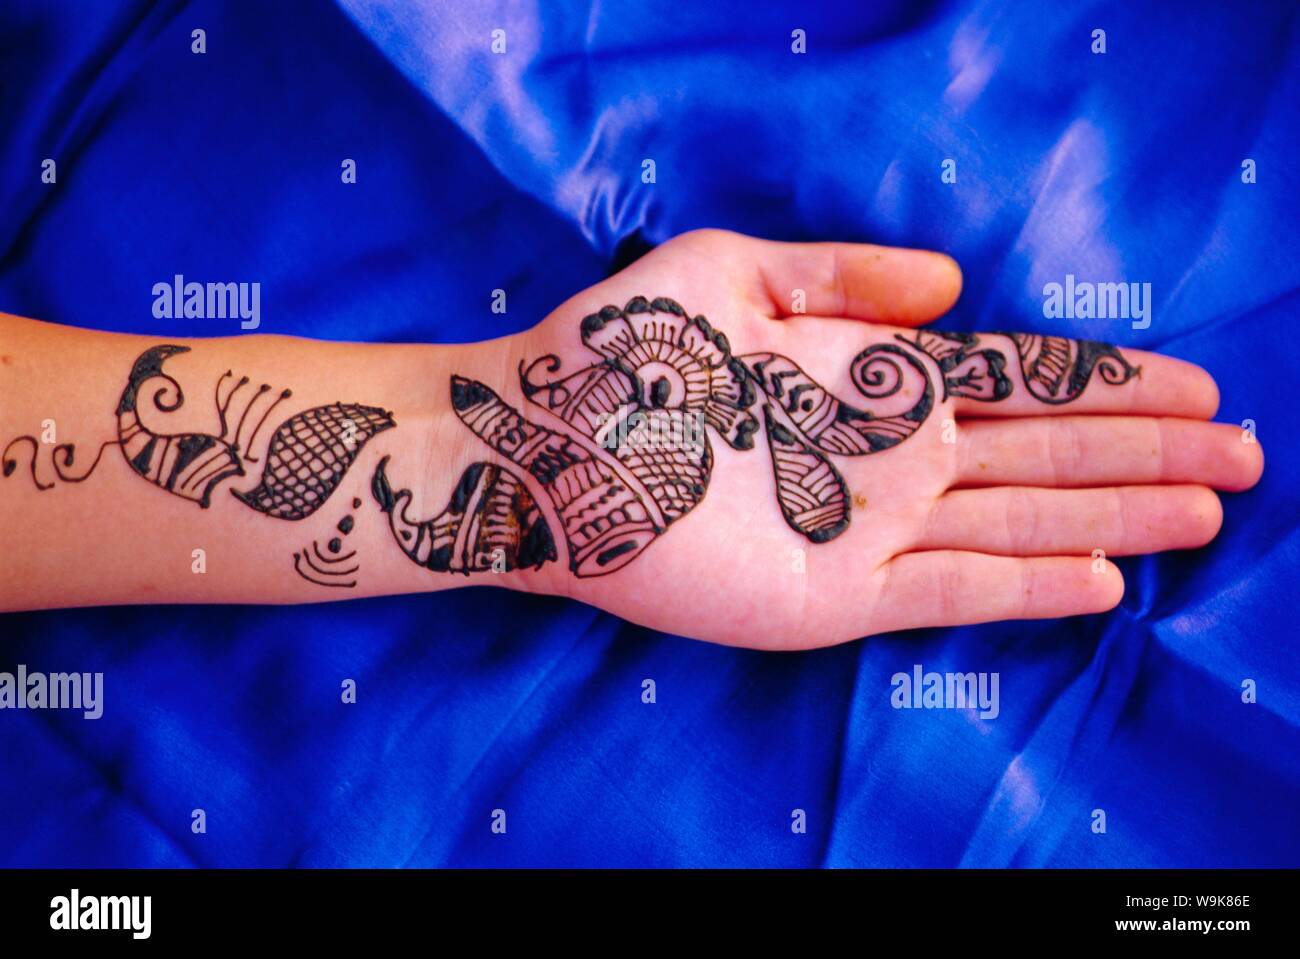 Woman's hand decorated with henna design, Rajasthan, India Stock Photo